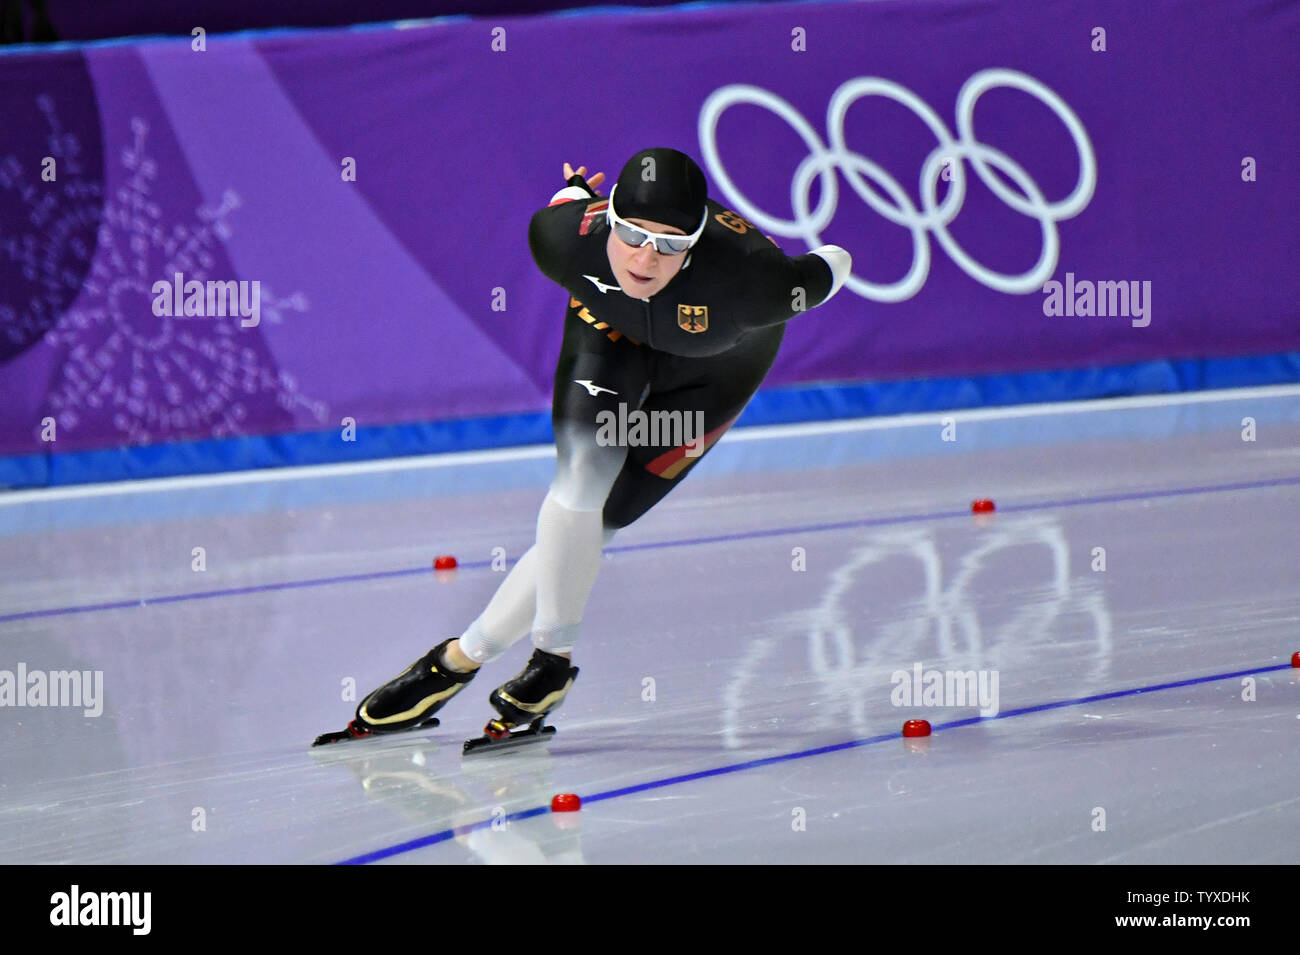 Claudia Pechstein of Germany in the Ladies 3000m Speed Skating finals during the Pyeongchang 2018 Winter Olympics, at the Gangneung Oval in Gangneung, South Korea, on February 10, 2018. Photo by Richard Ellis/UPI Stock Photo